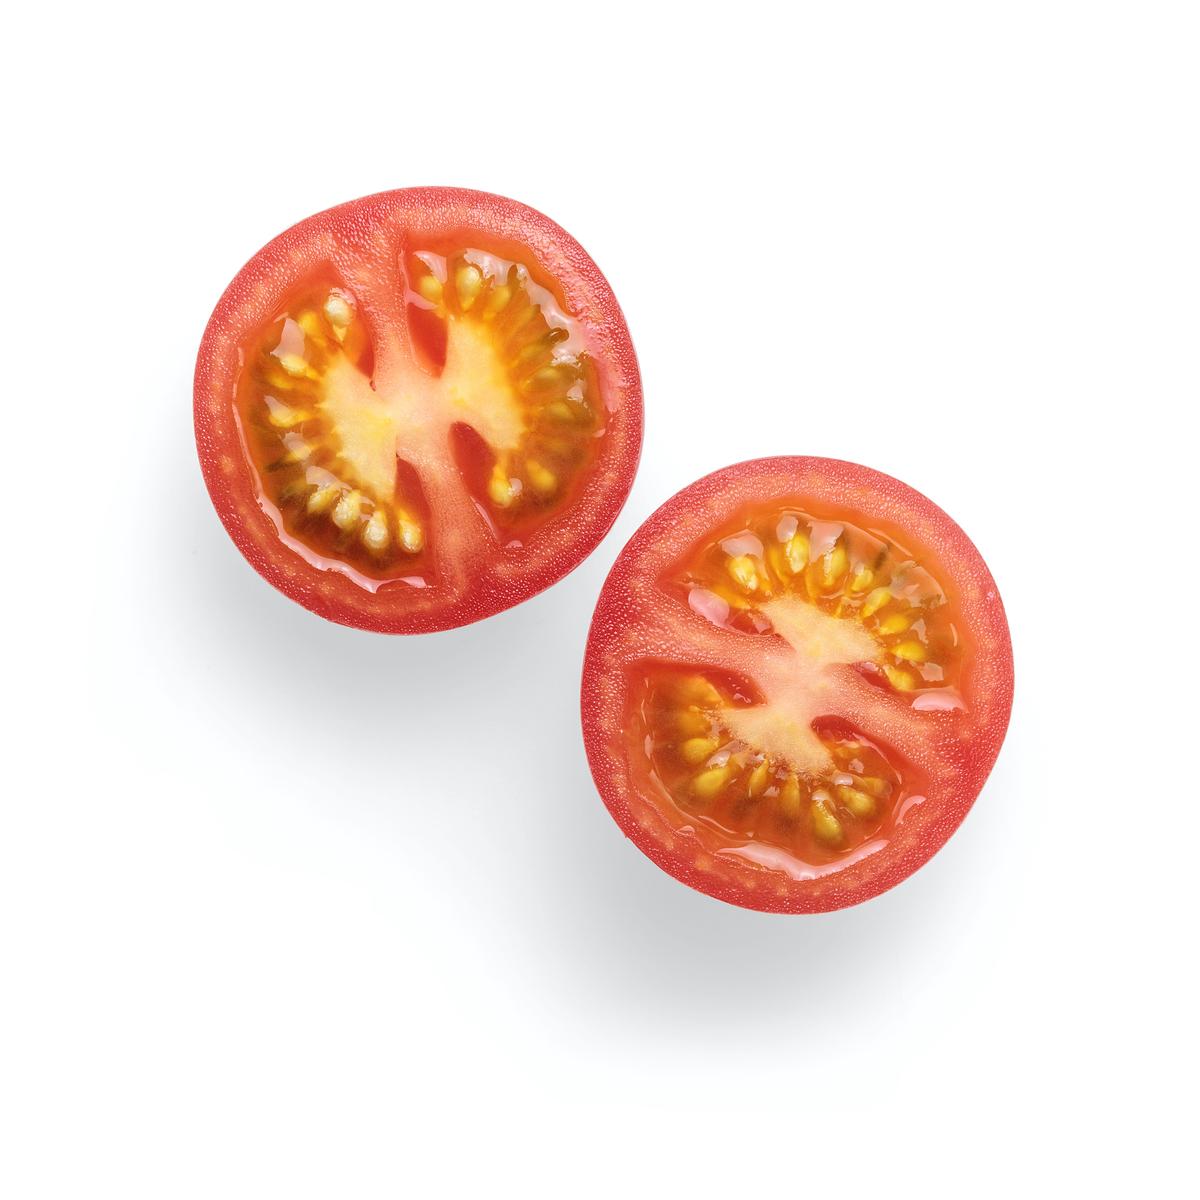 Image of tomato seeds on a white background ready for planting